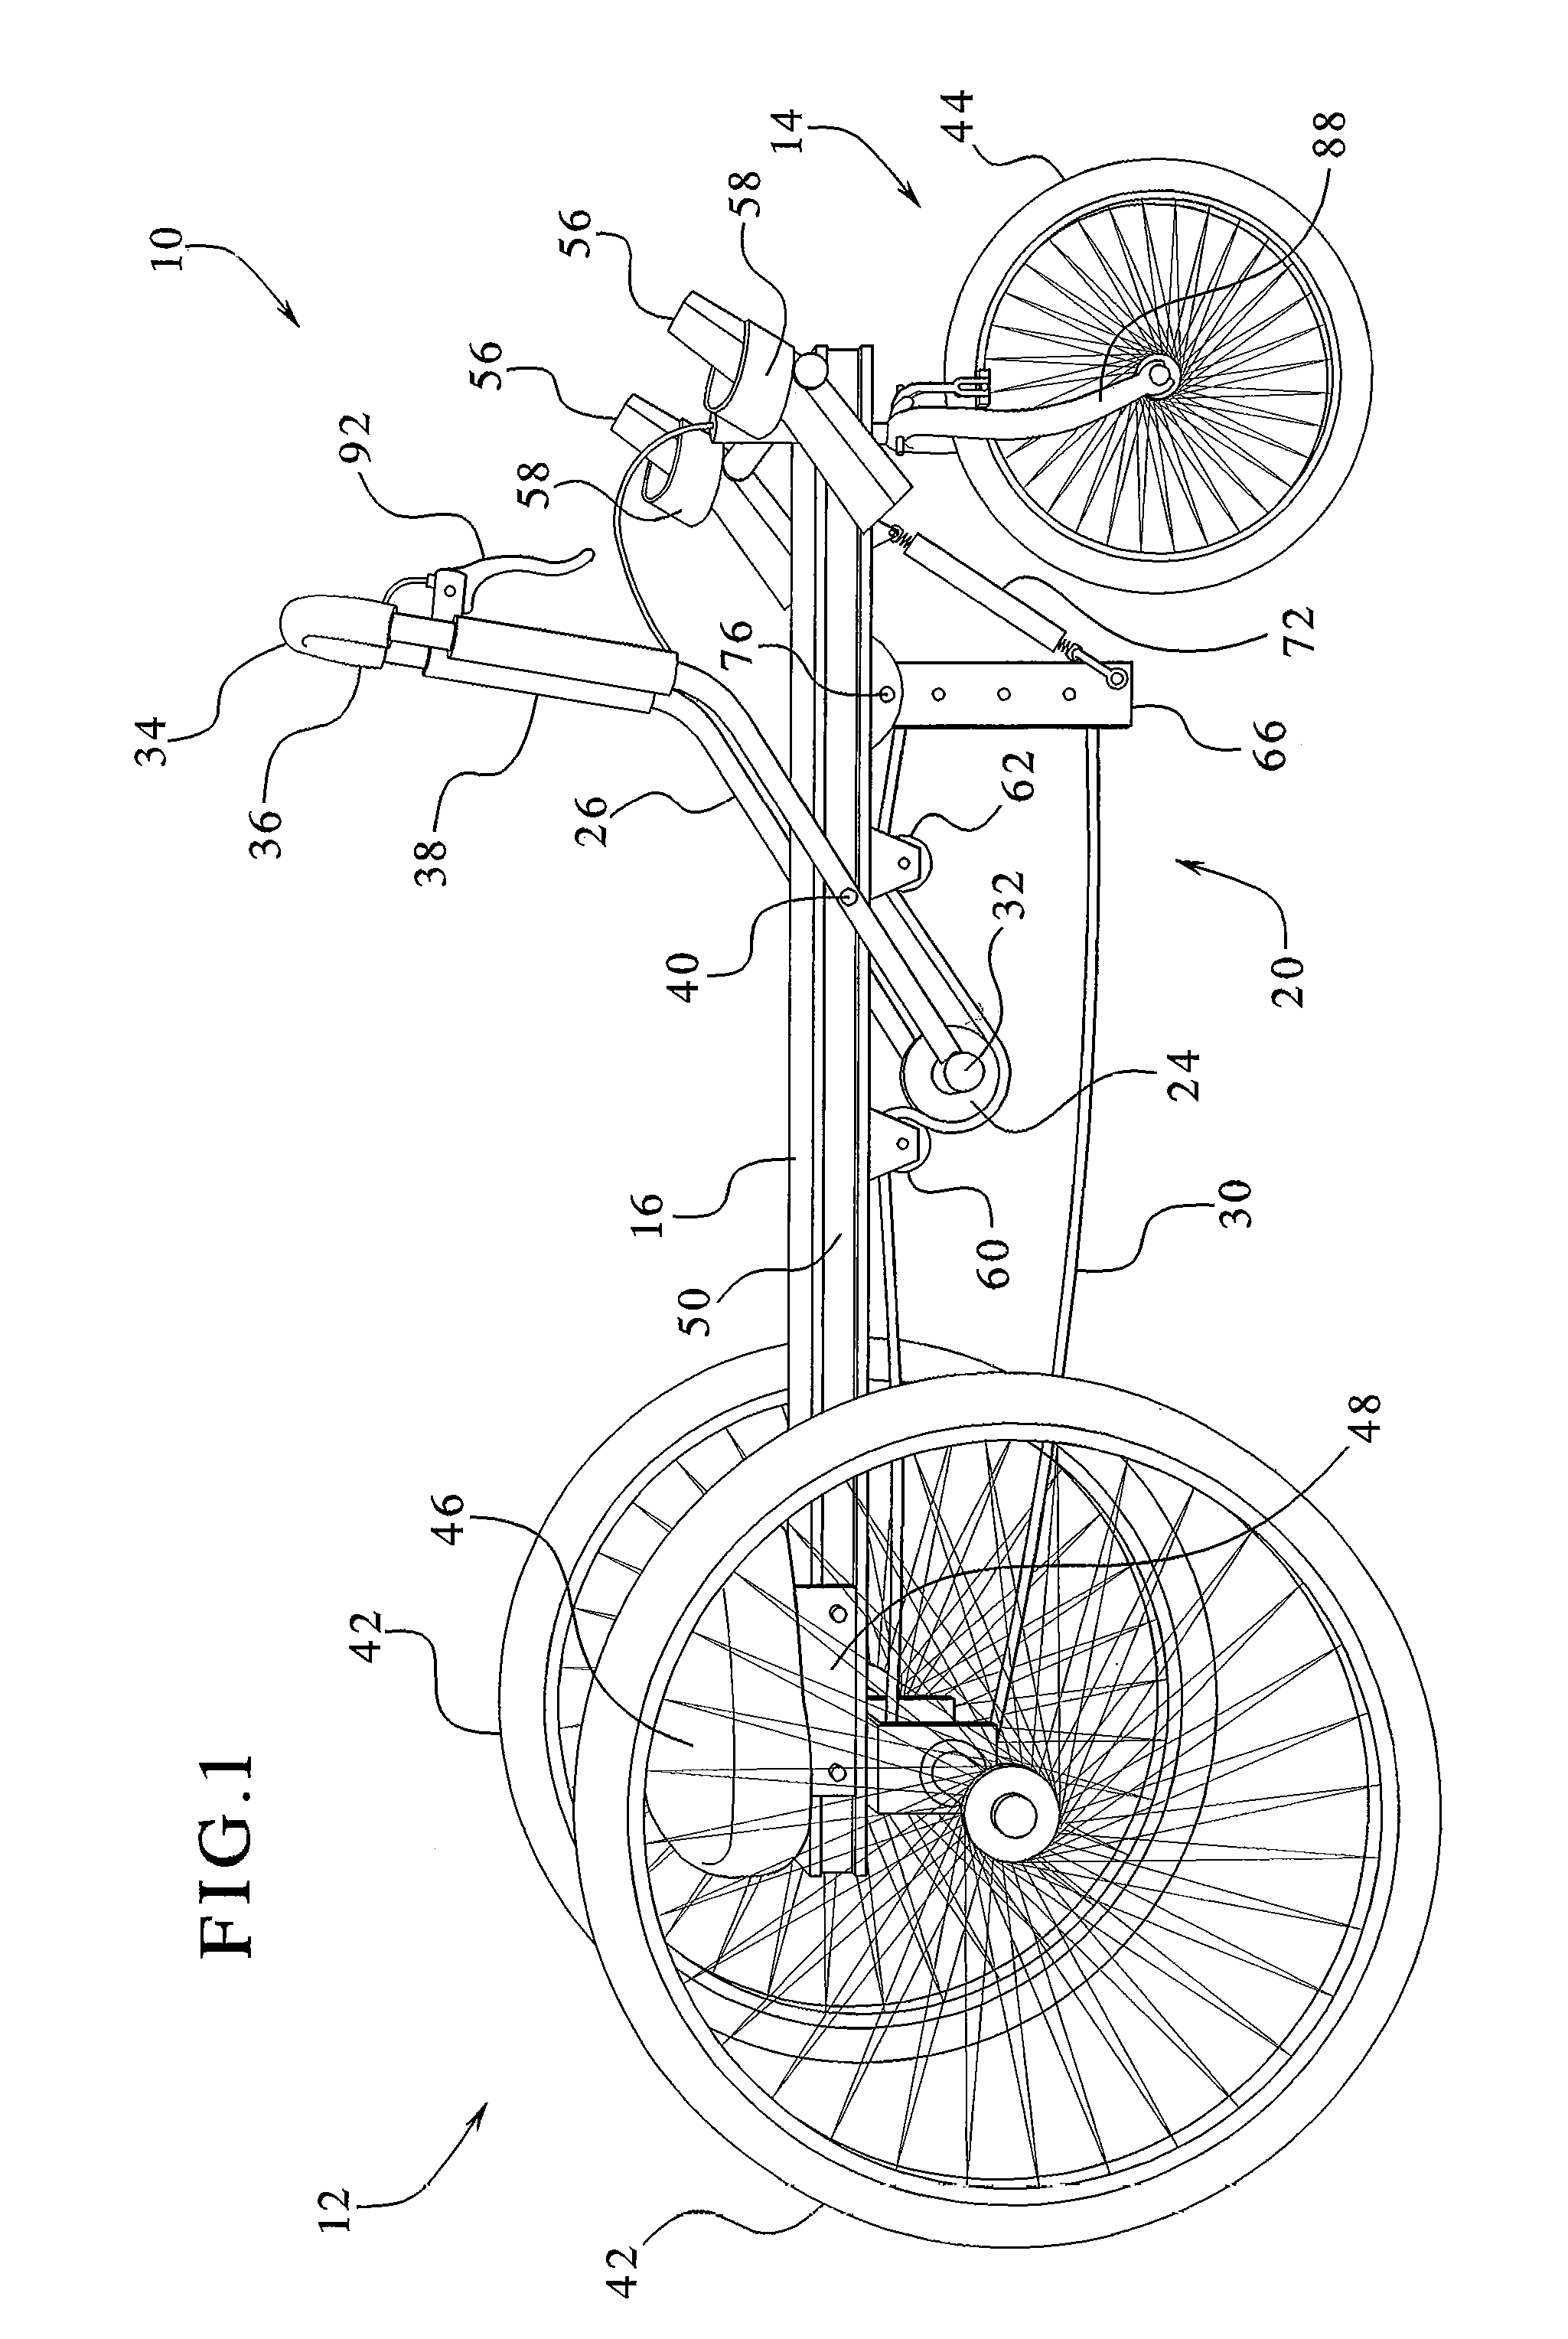 Steering mechanism and method for a manually powered vehicle